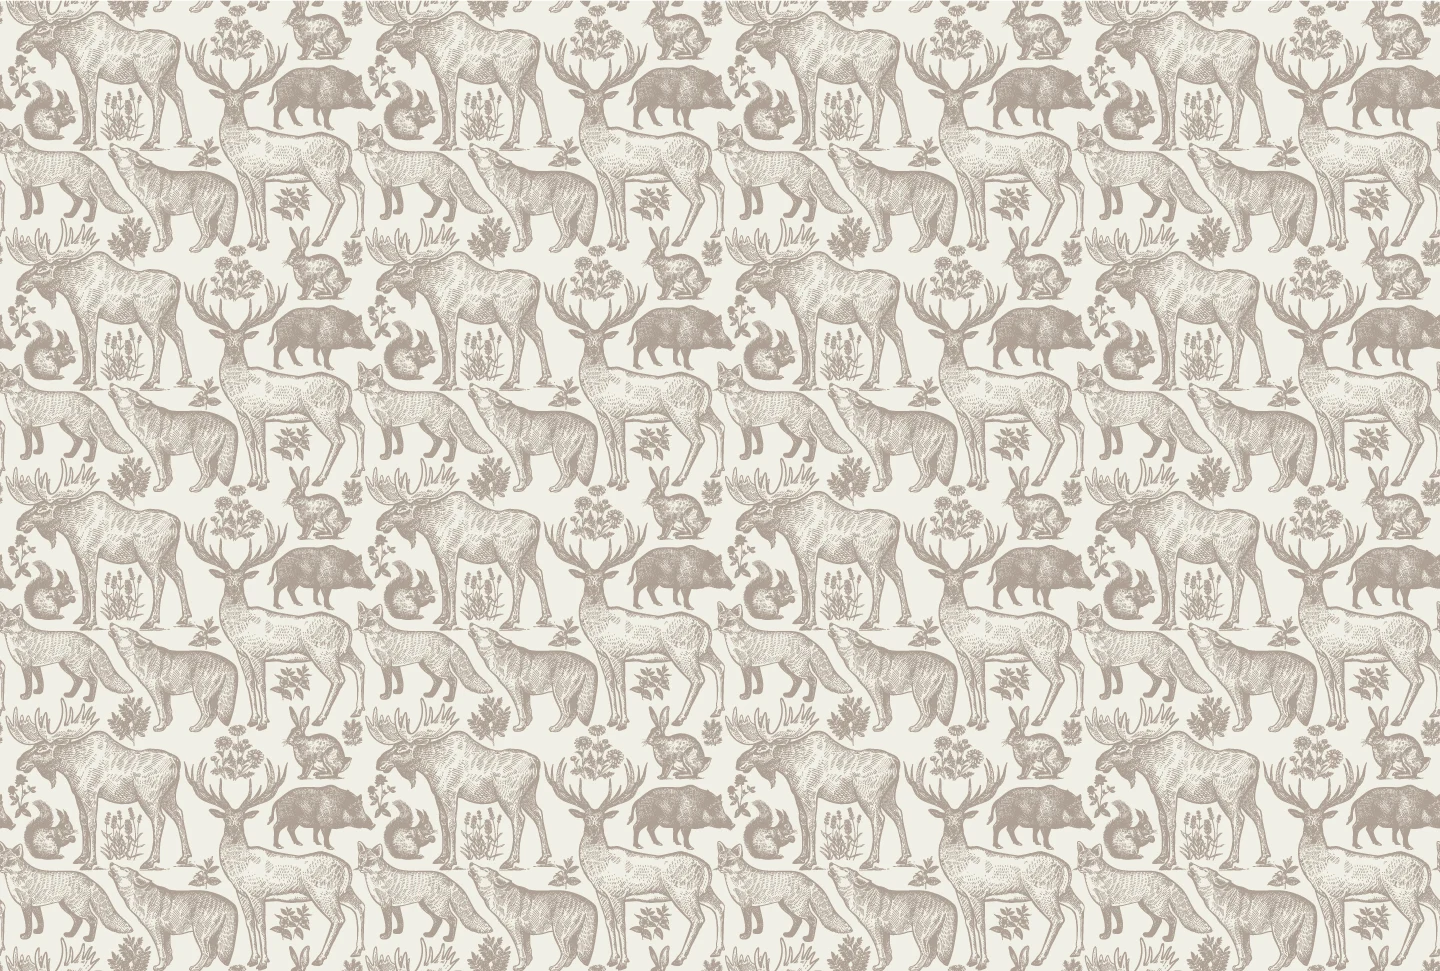 forest-animals-wallpaper-design-vintage-style-forest-gray